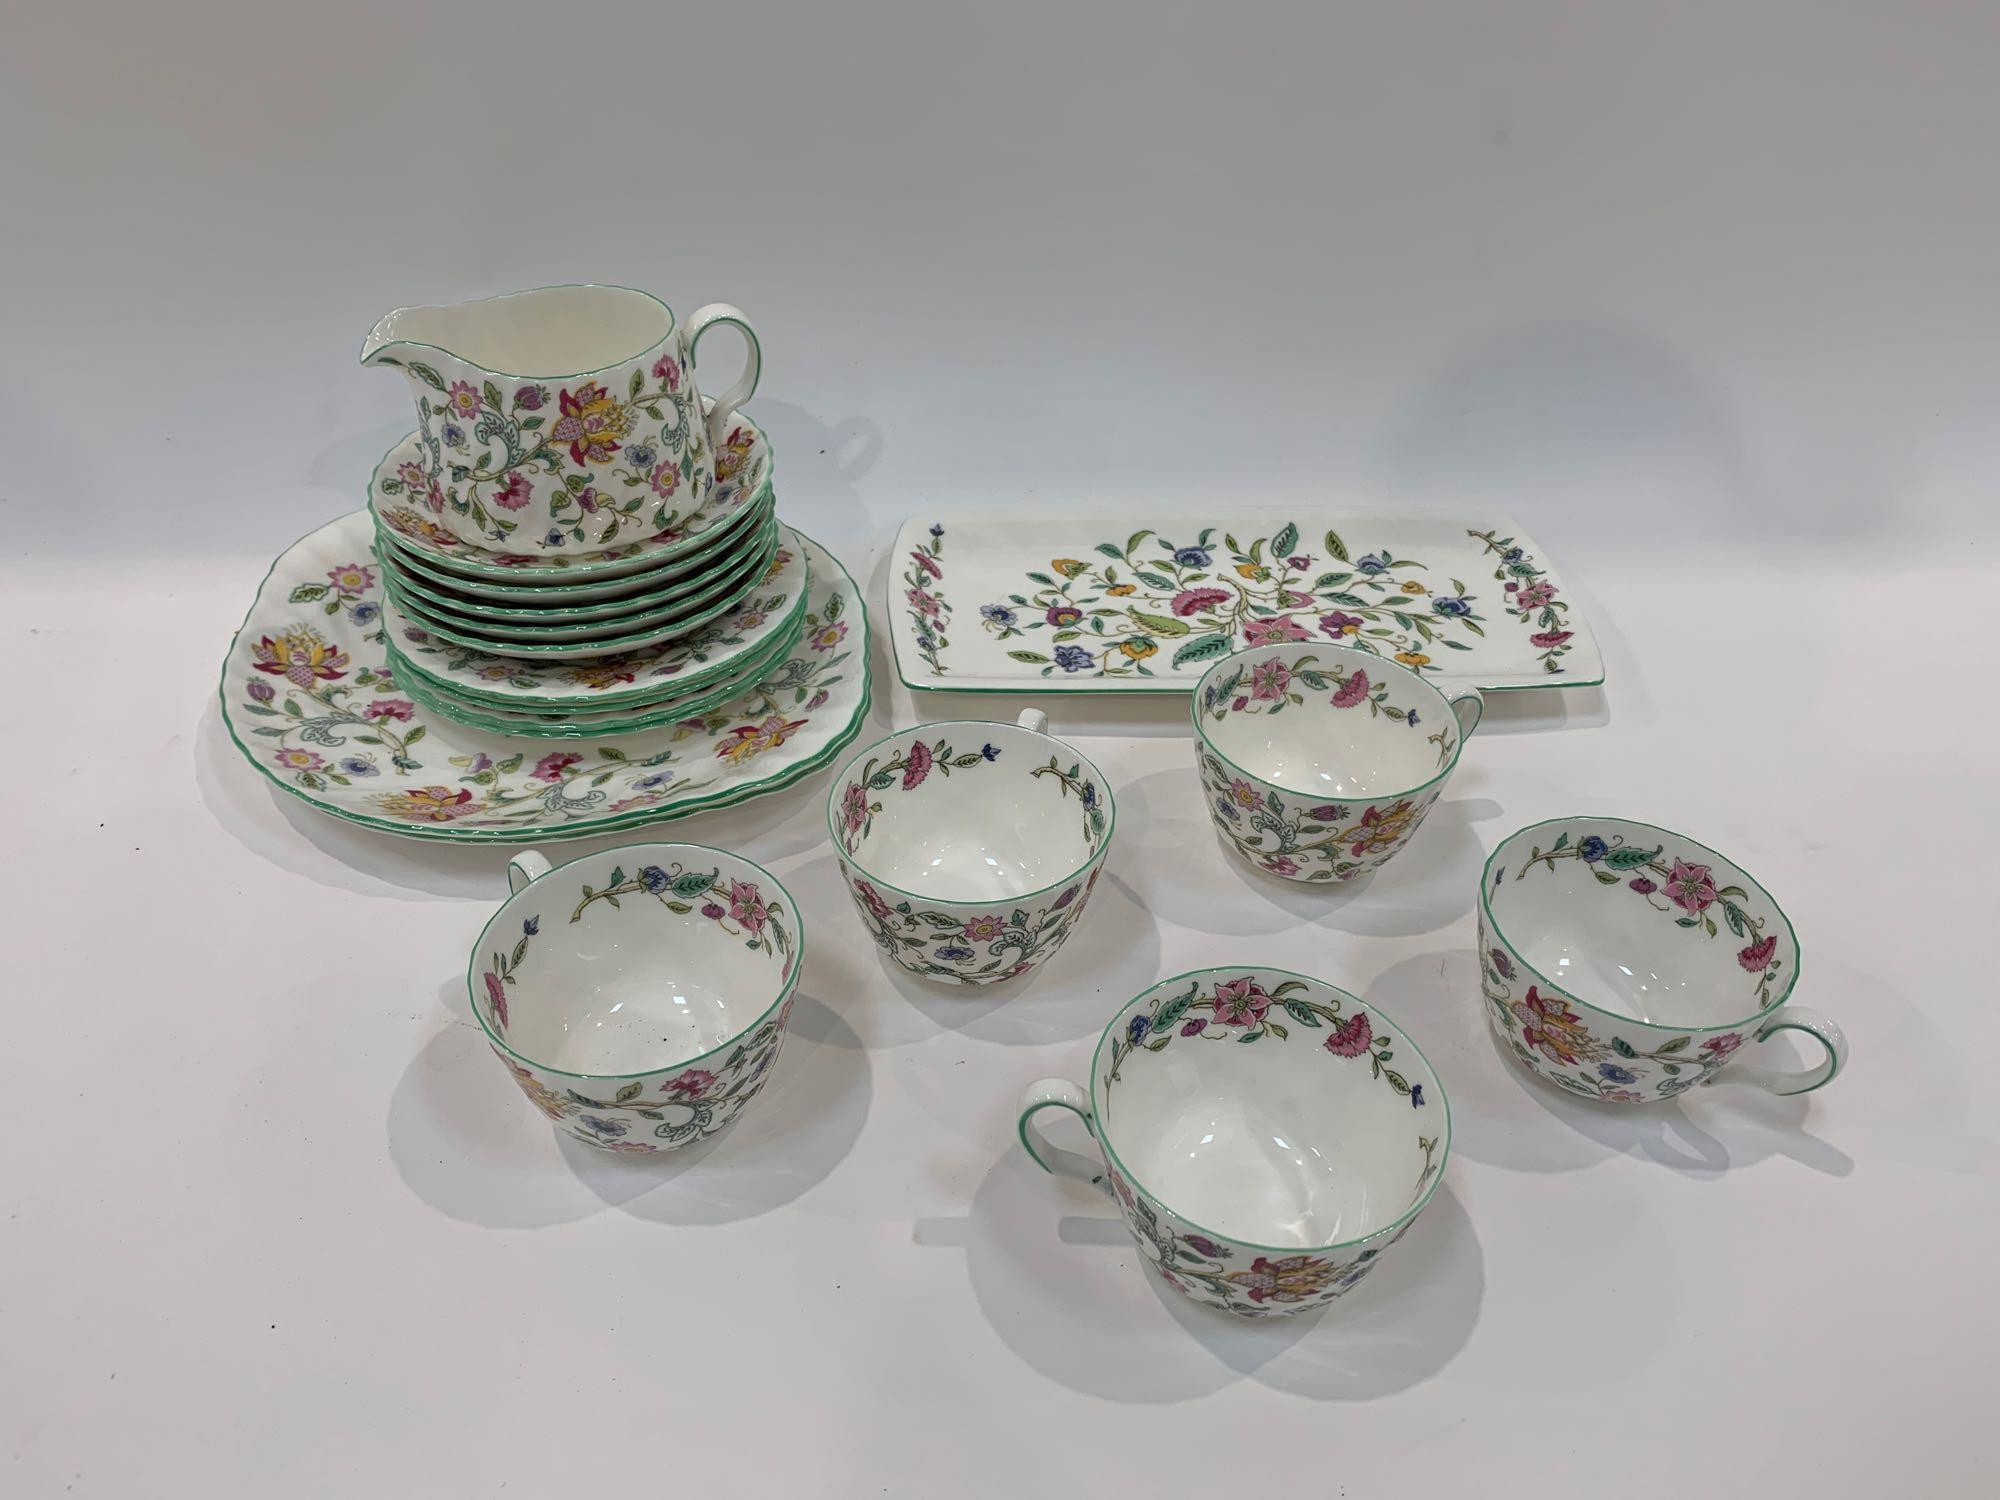 A Mintons Haddon Hall part tea service. Viewing/co